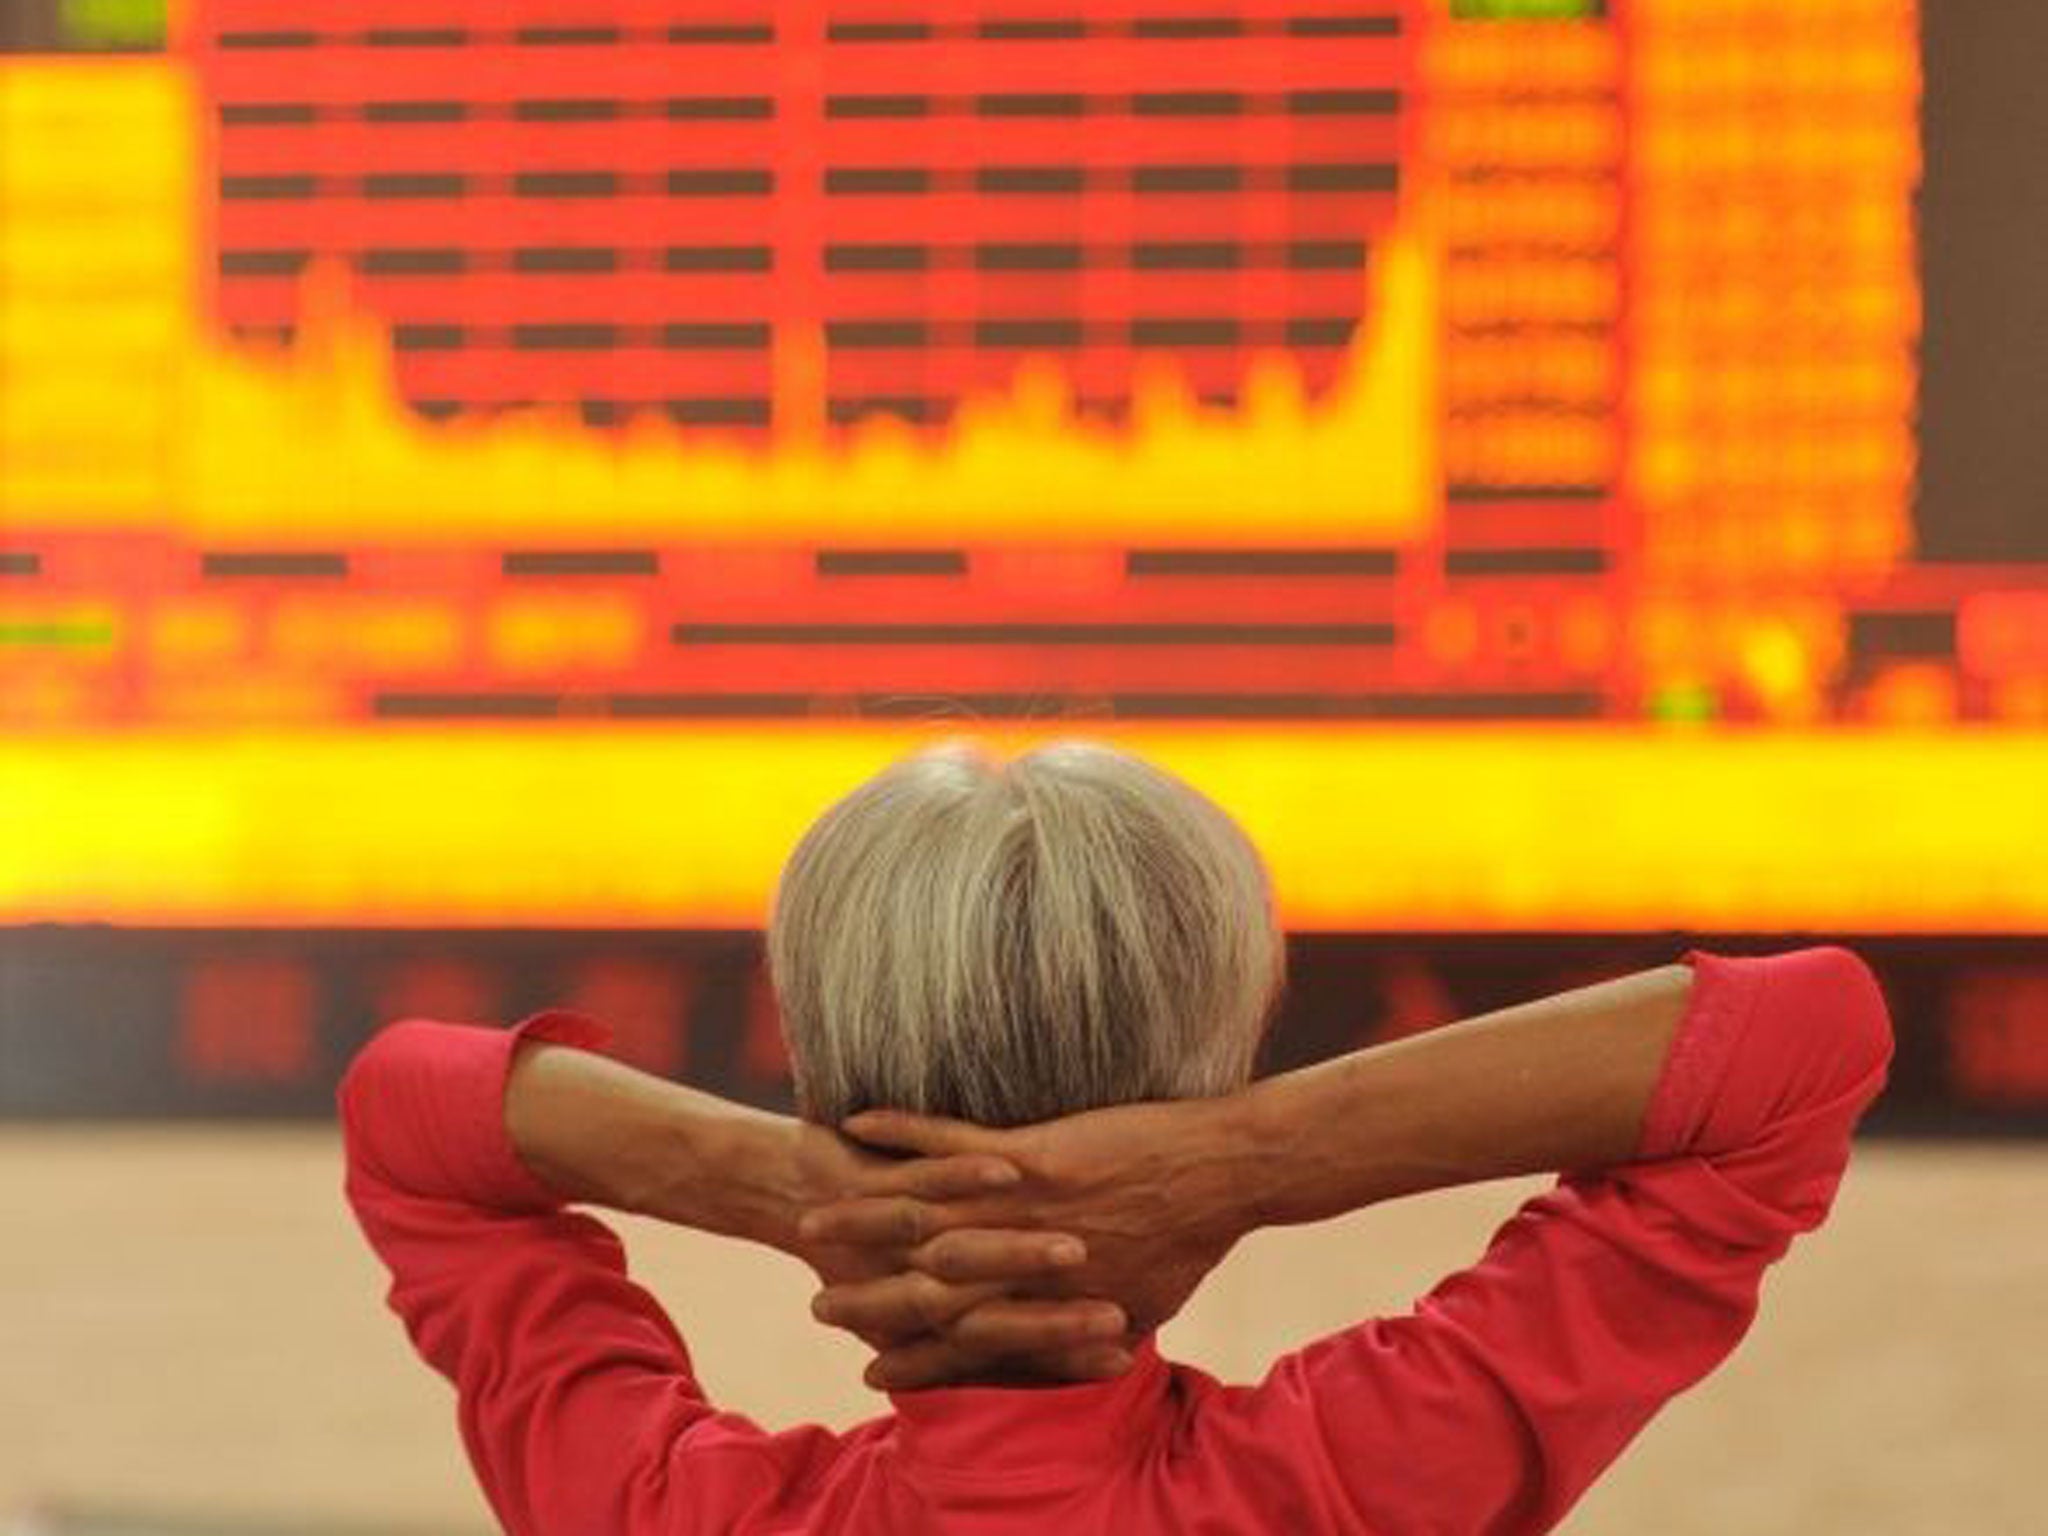 Take it as red: market chaos in China has persuaded one expert that ‘cataclysm’ is on its way this year